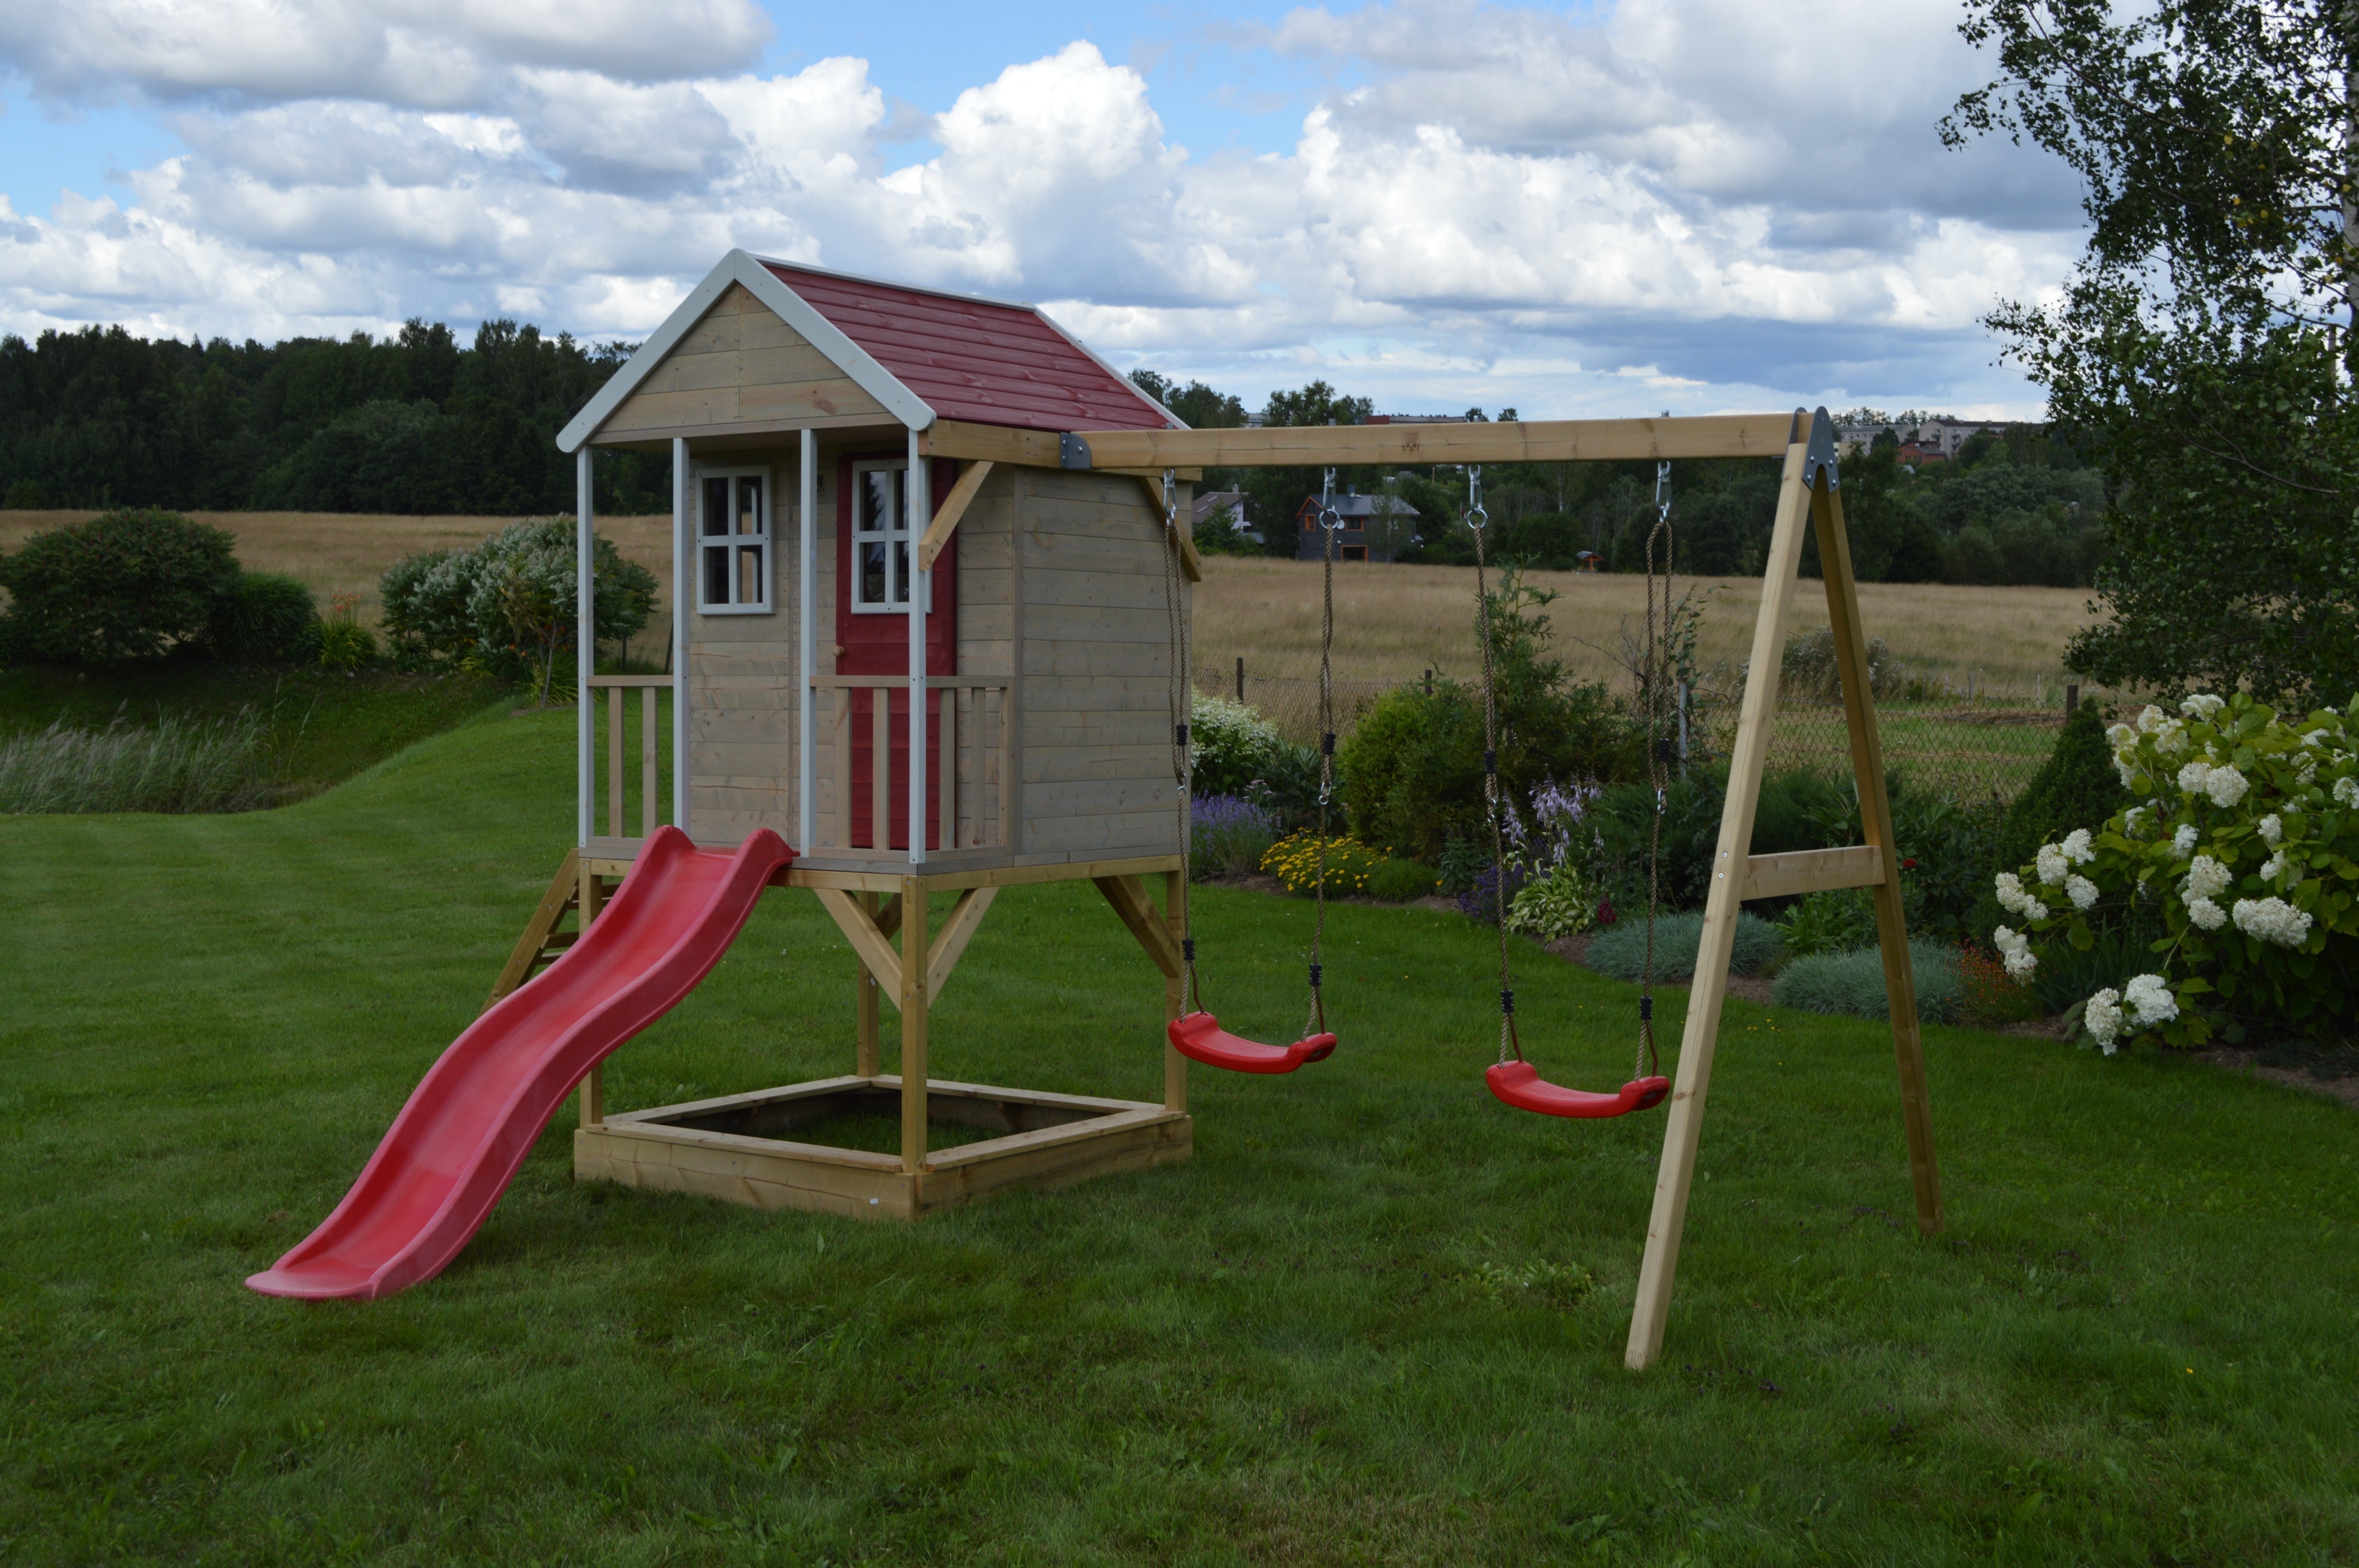 M30R-GK Nordic Adventure House with Platform, Slide and Double Swing + Gym & Kitchen Attachment